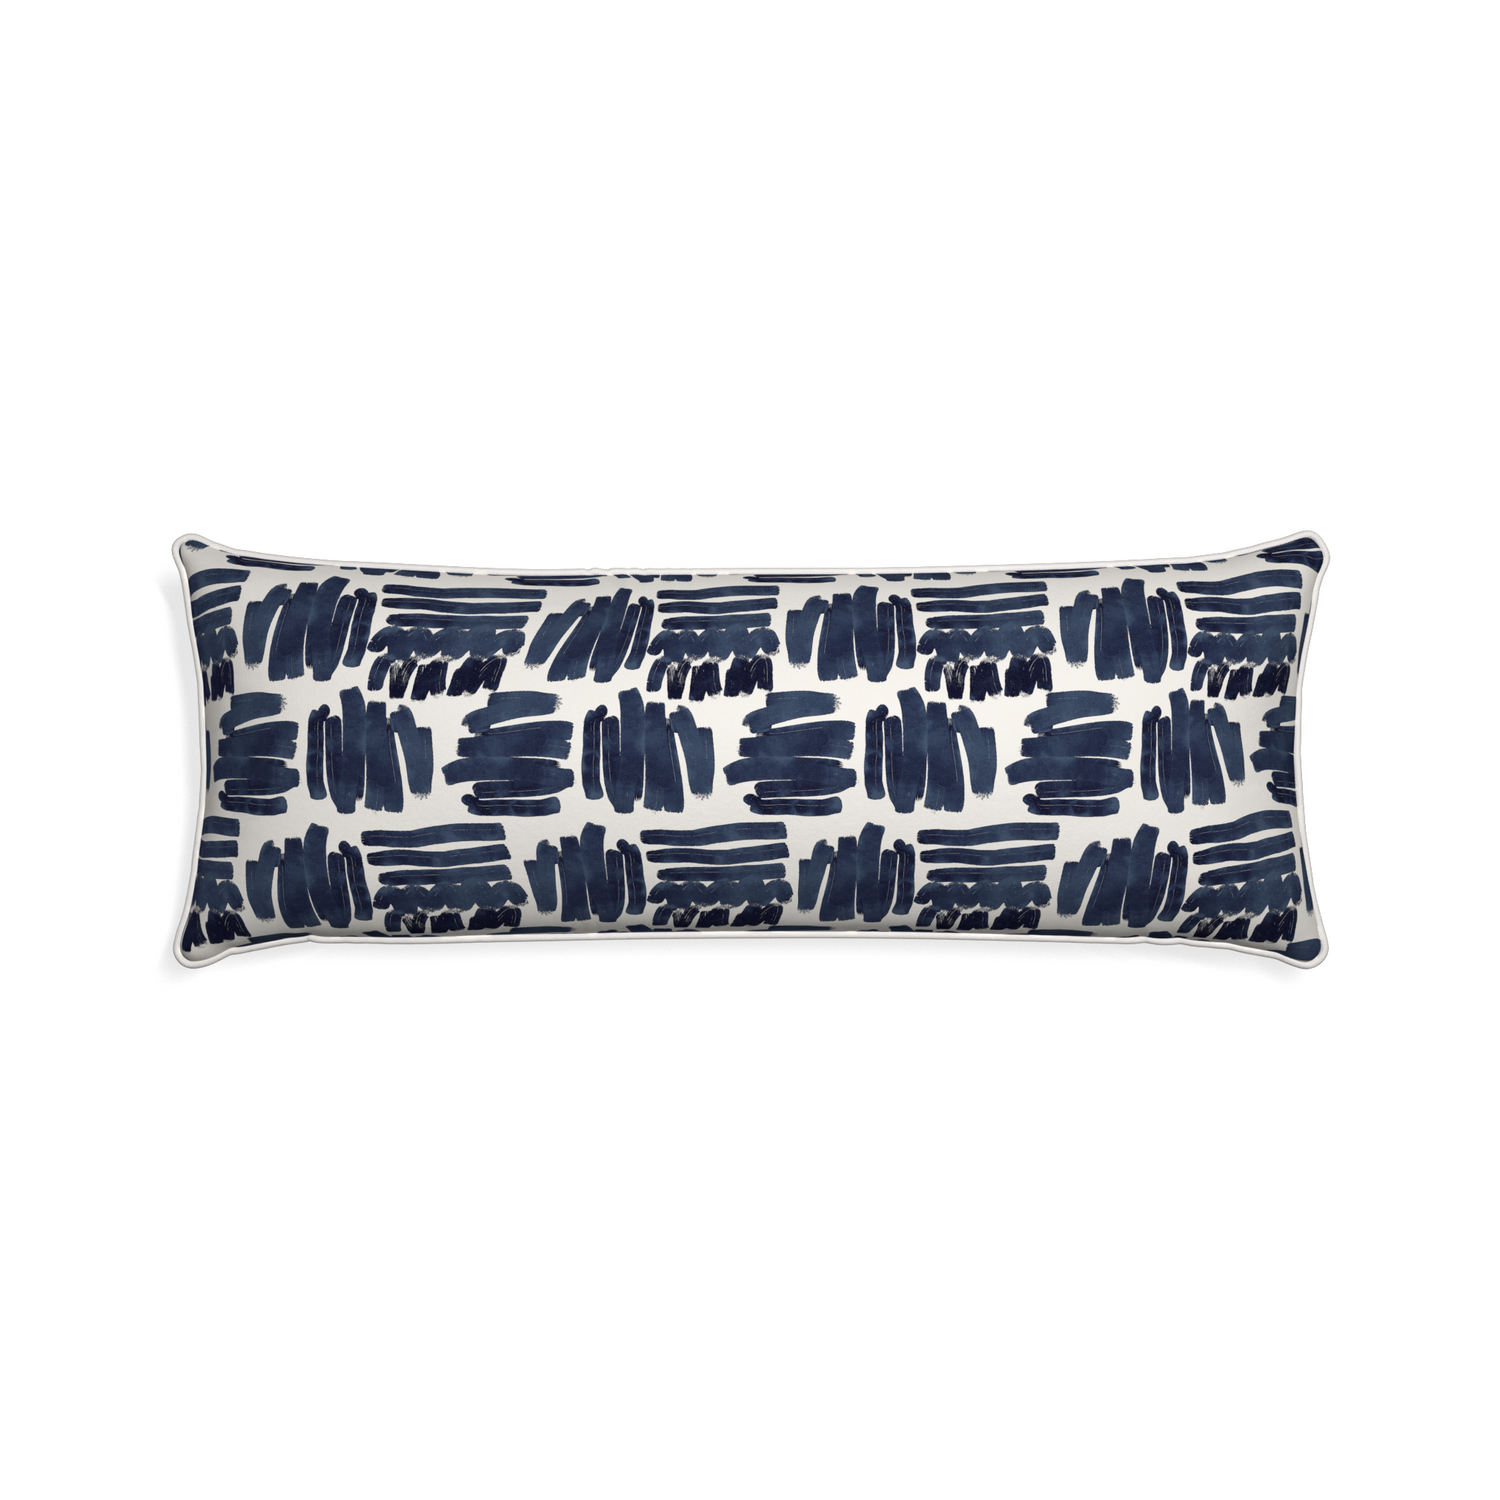 Xl-lumbar warby custom pillow with snow piping on white background